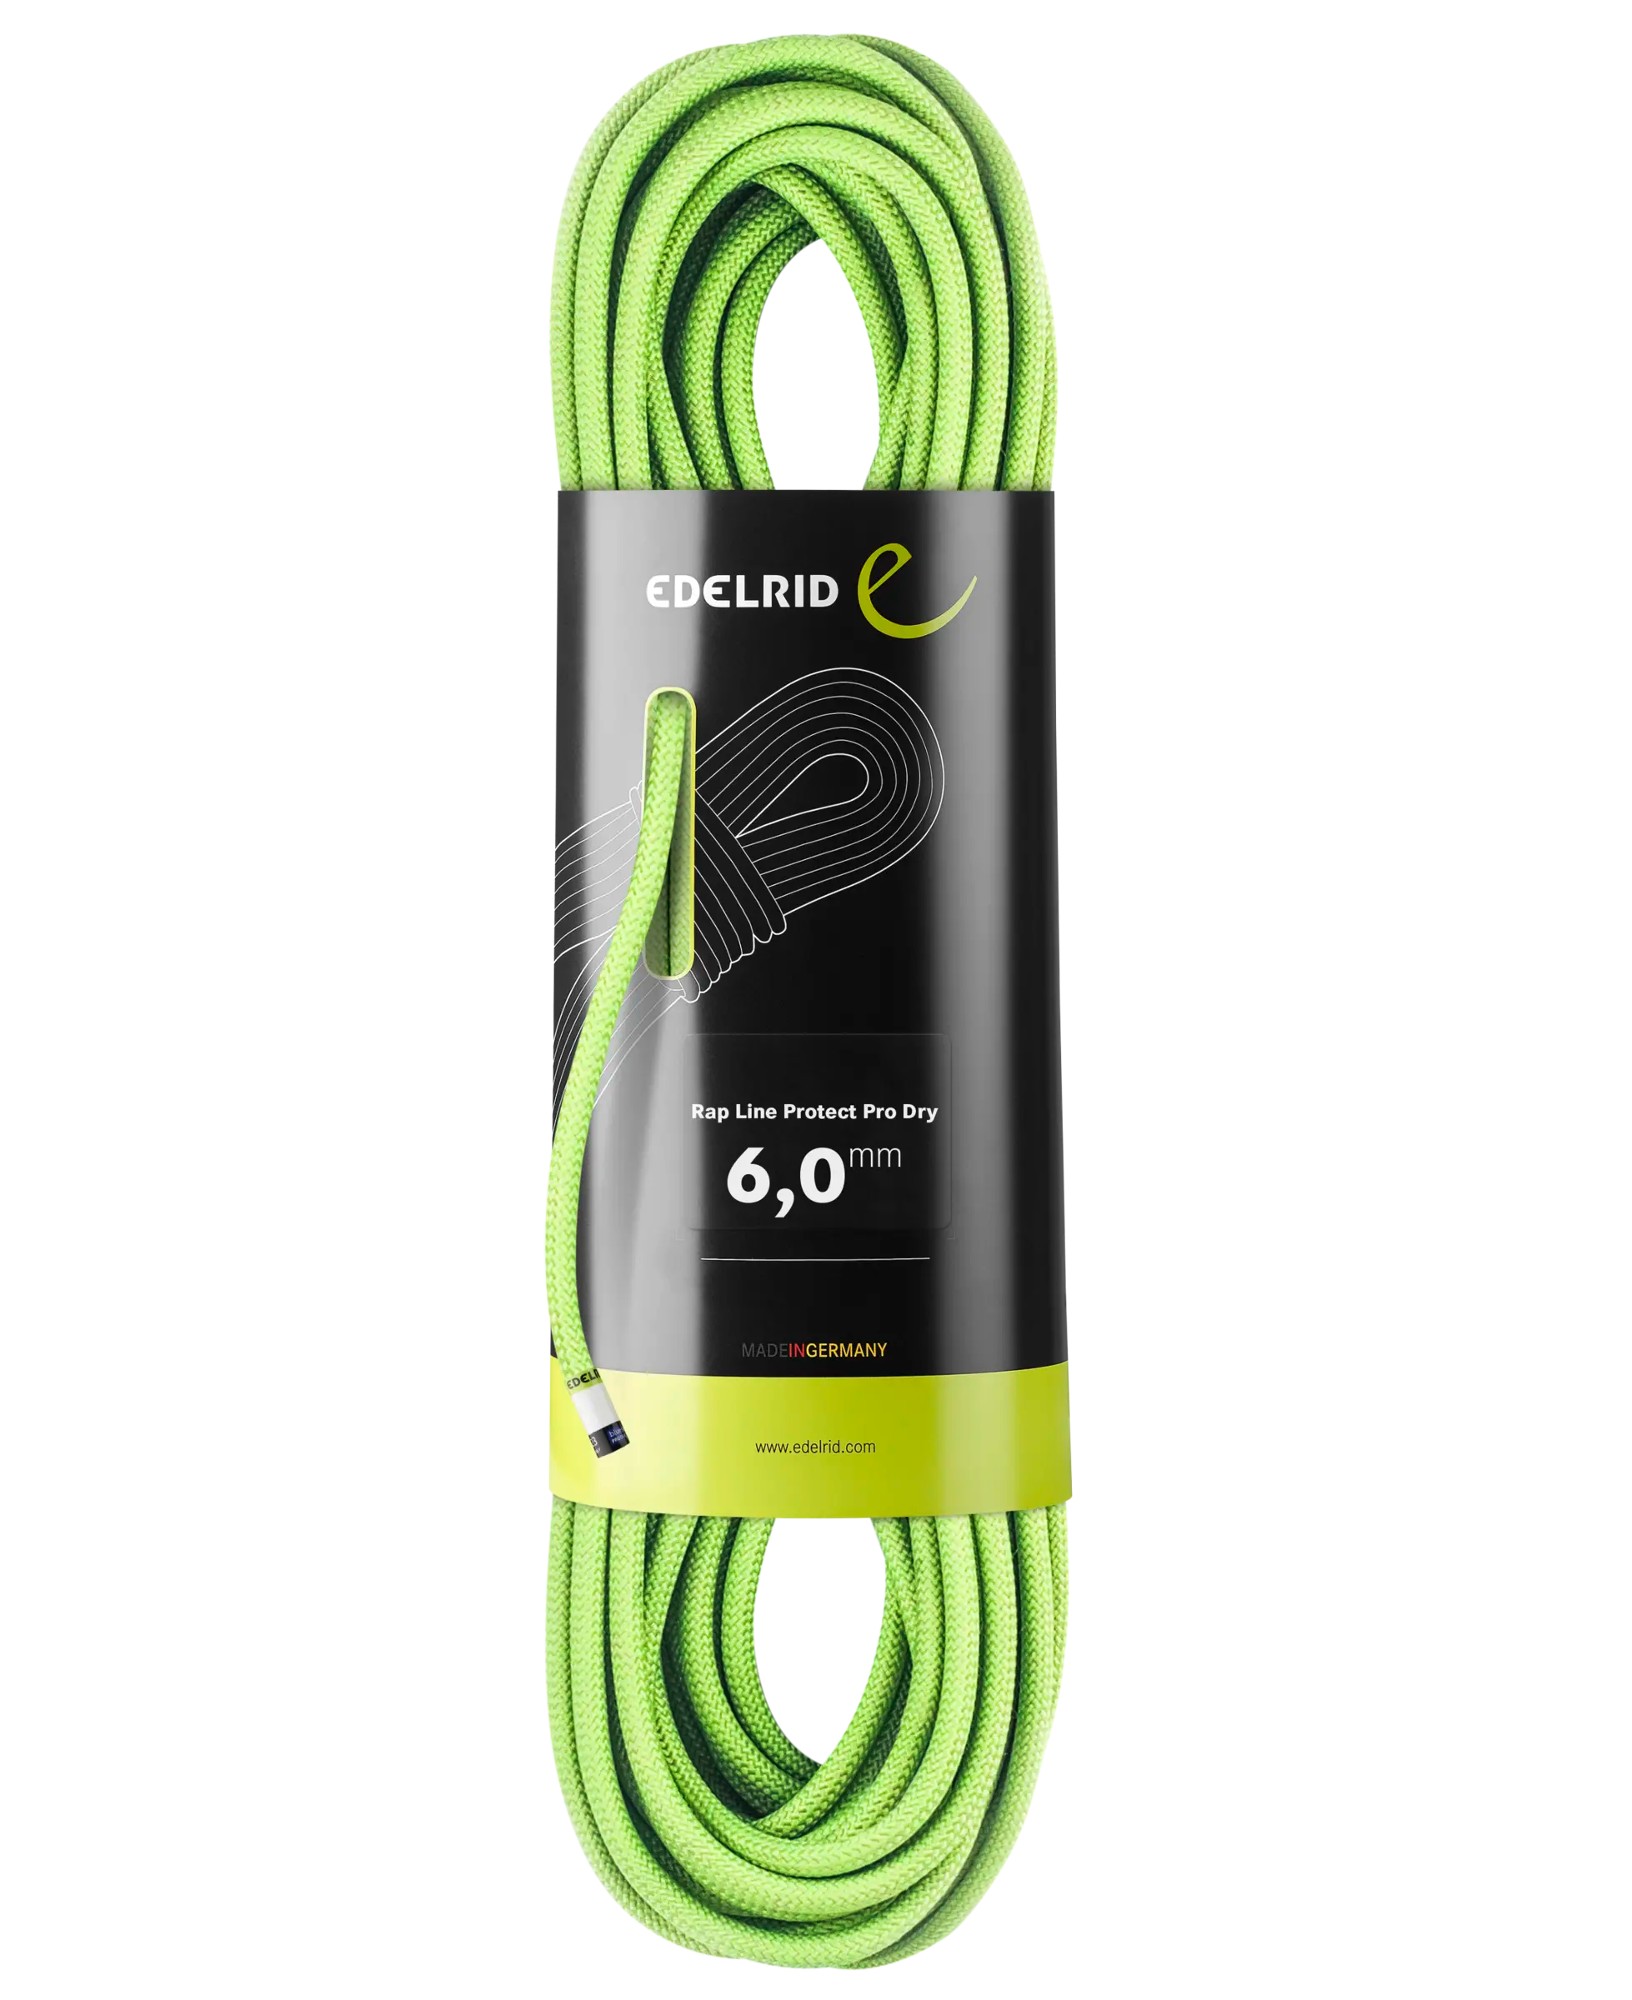 Edelrid Rap Line Protect Pro Dry 40m Abseiling Haul Rope